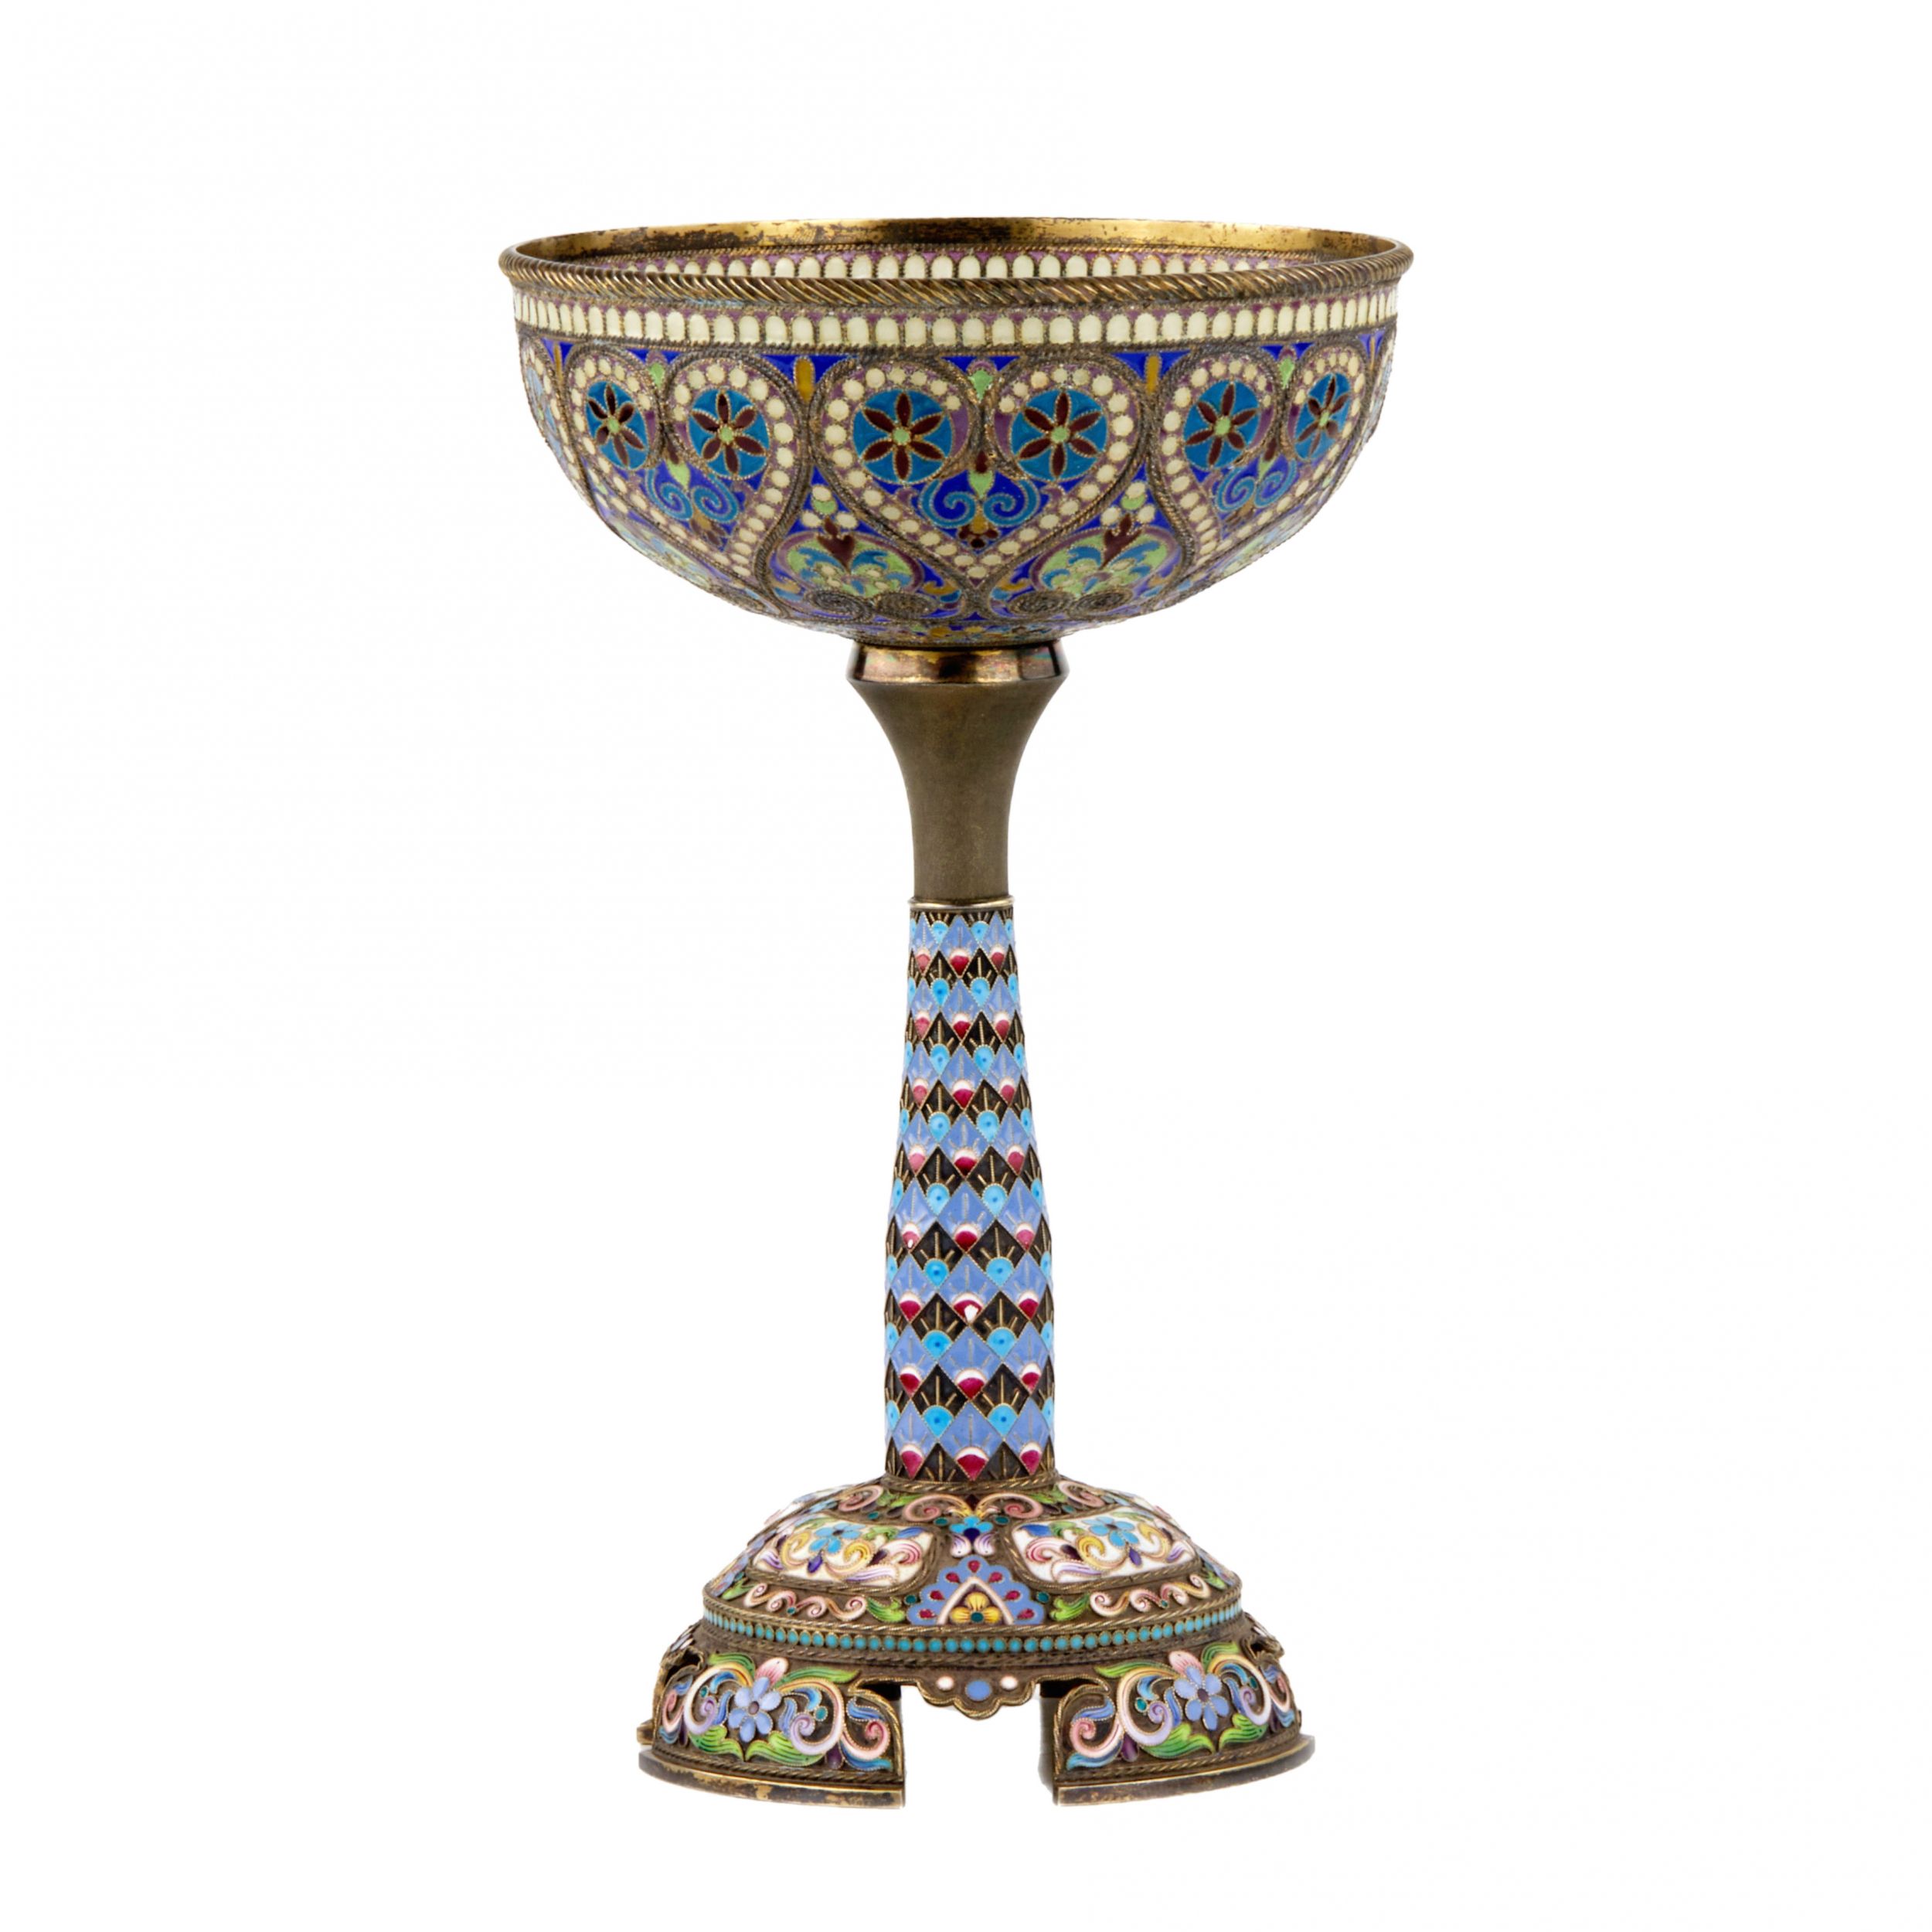 The-magnificent-silver-goblet-of-Ivan-Khlebnikov:-painted-cloisonne-and-stained-glass-enamels-